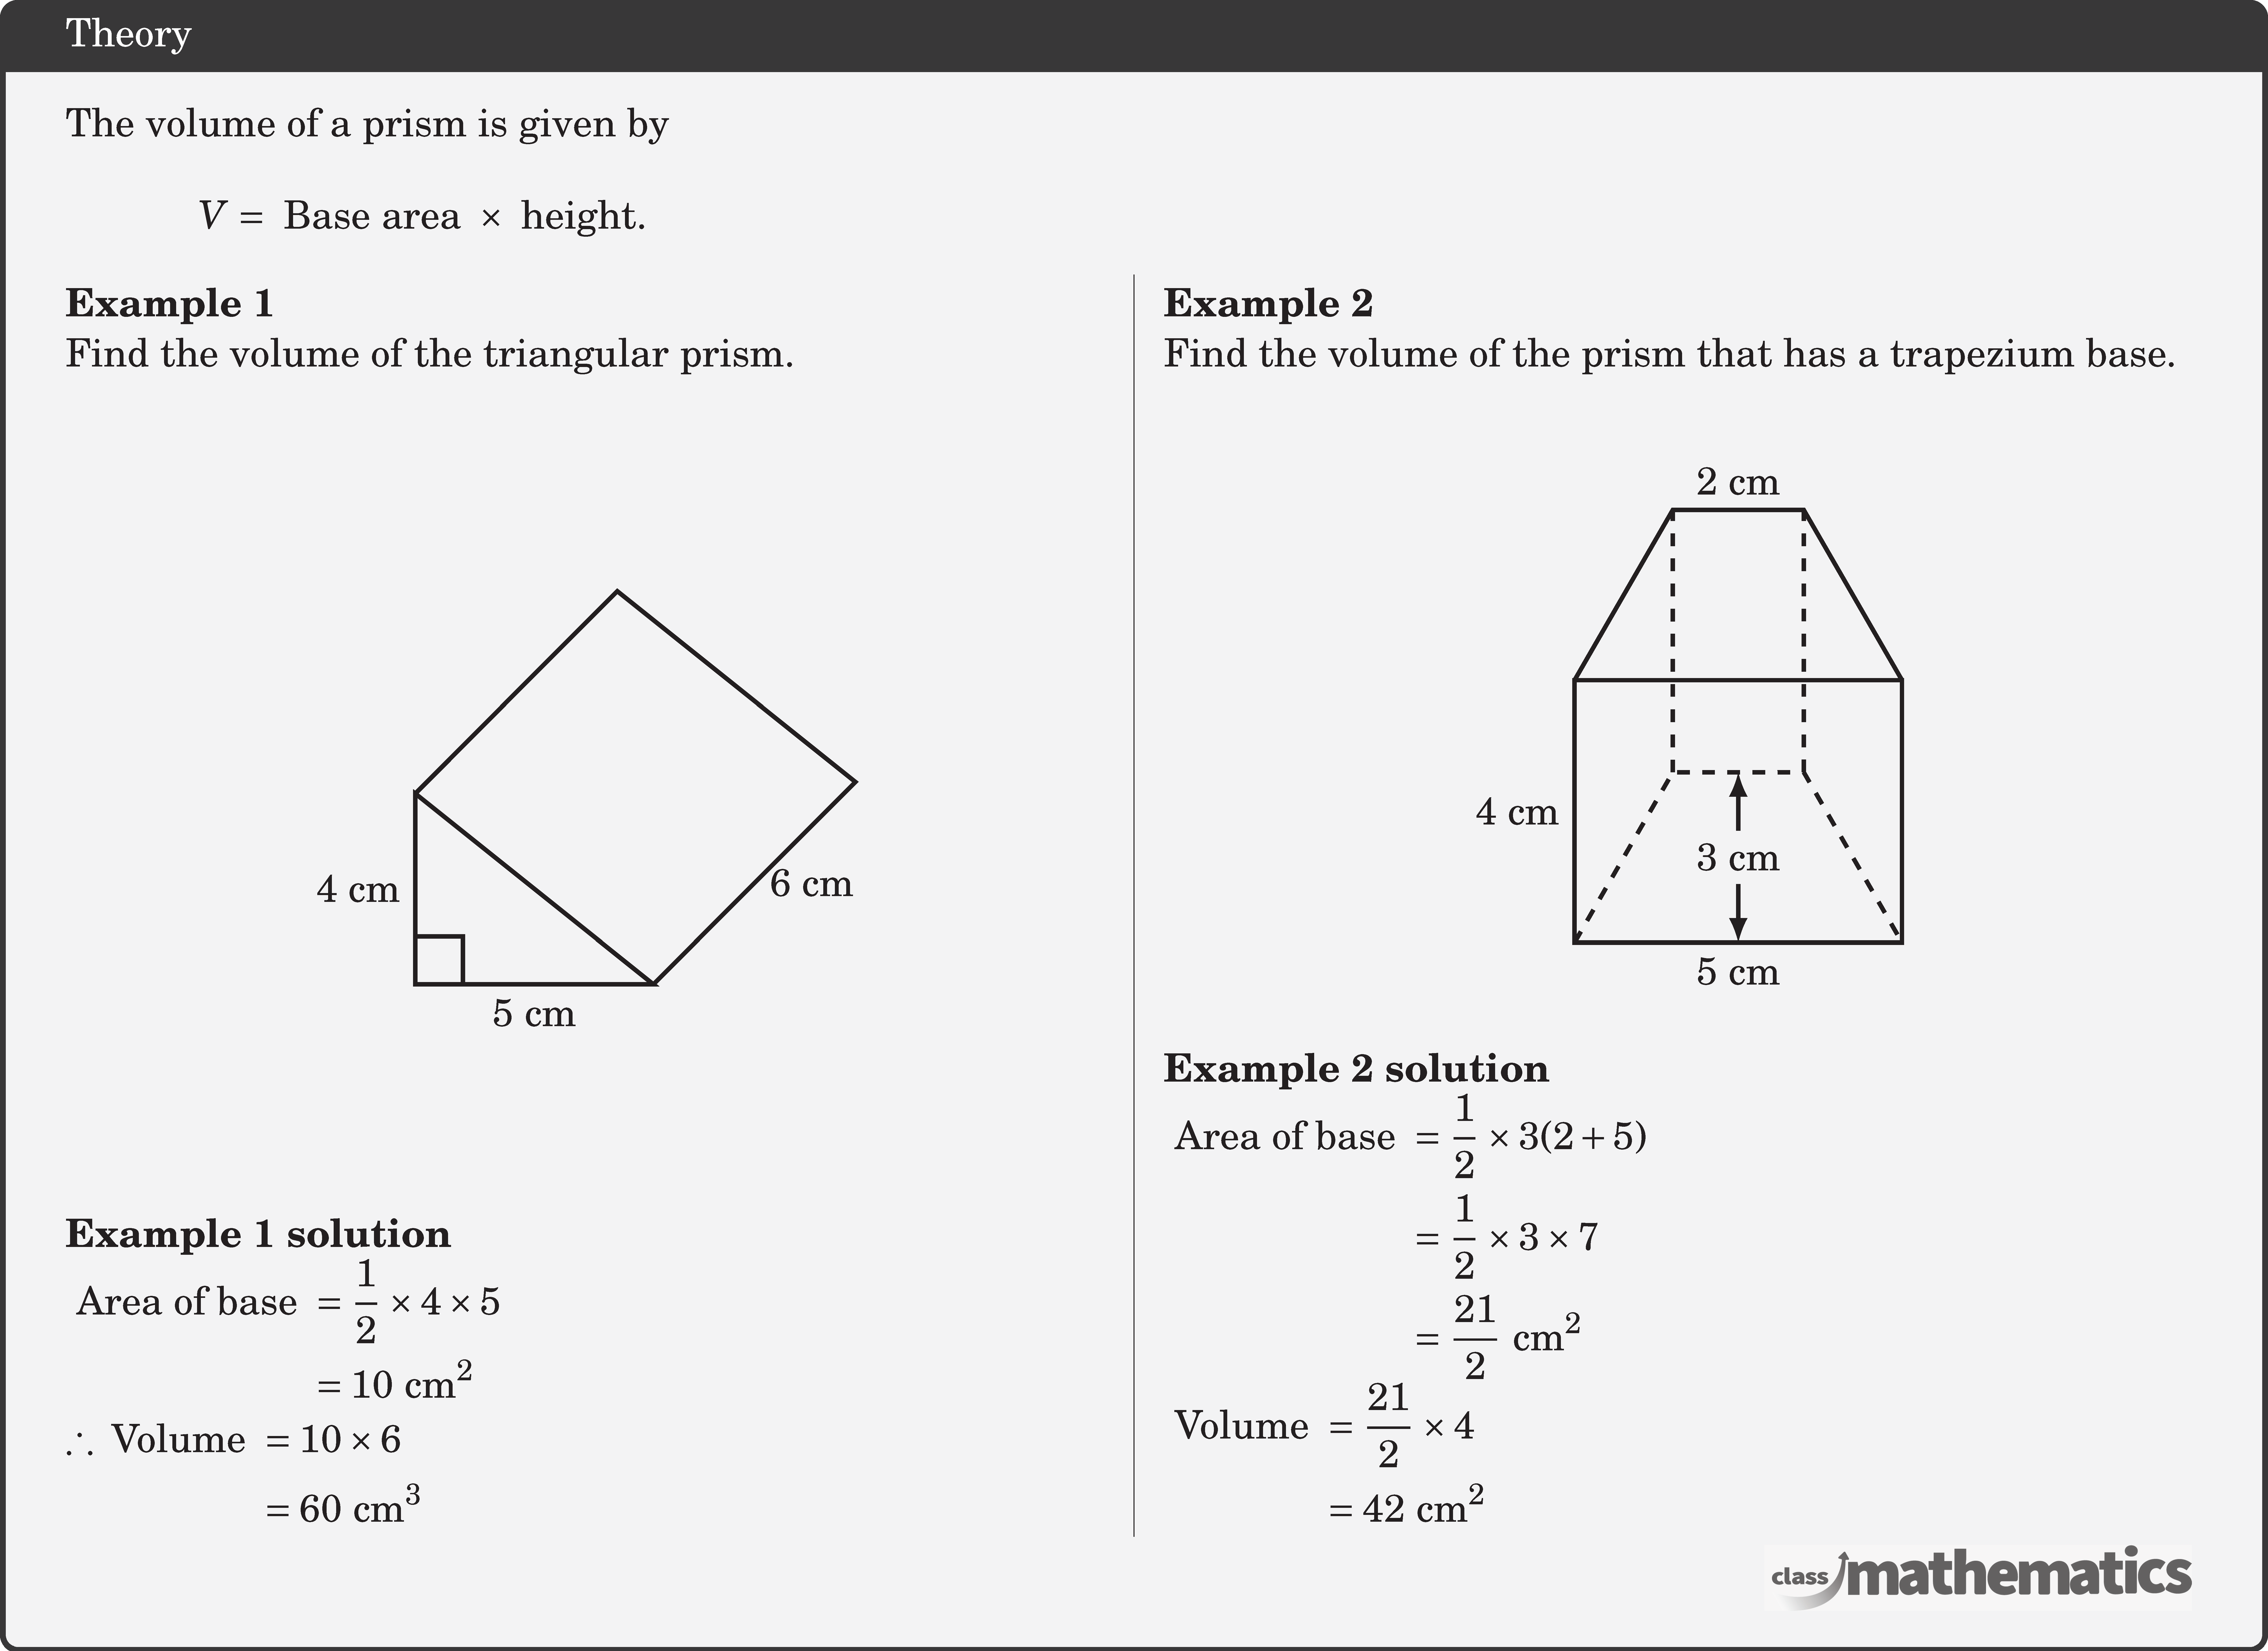 \begin{minipage}[c]{6cm} The volume of a prism is given by  $$V= \text{ Base area } \times \text{ height}.$$ \end{minipage}\\  \begin{multicols}{2} \textbf{Example 1}\\ Find the volume of the triangular prism.\\ \begin{center} \begin{tikzpicture}[scale=0.4,line width=1pt] \coordinate[label=above:] (O) at (0,0); \coordinate[label=right:] (B) at (90:4); \coordinate[label=left:] (A) at (right:5); \begin{scope}[shift=(B)] \coordinate[label=left:] (C) at (45:6); \end{scope} \begin{scope}[shift=(A)] \coordinate[label=left:] (D) at (45:6); \end{scope} \draw (B)--(O) node[left,midway]{4 cm}--(A)node[below,midway]{5 cm}--cycle; \draw (B)--(C)--(D)--(A) node[right,midway] {6 cm}; \pic [draw=black,line width=1pt,angle radius=0.4cm,angle eccentricity=1.6,""] {right angle=A--O--B}; \end{tikzpicture} \end{center} \textbf{Example 1 solution}\\ \(\begin{aligned} \text { Area of base } & =\frac{1}{2} \times 4 \times 5 \\ & =10 \text{~cm}^2  \end{aligned}\)\\ \(\begin{aligned} \therefore \text { Volume } & =10 \times 6 \\ & =60 \text{~cm}^3 \end{aligned}\)  \columnbreak \textbf{Example 2}\\ Find the volume of the prism that has a trapezium base.\\ \begin{center} \begin{tikzpicture}[scale=0.55,line width=1pt] \coordinate[label=above:] (O) at (0,0); \coordinate[label=right:] (B) at (90:4); \coordinate[label=left:] (A) at (right:5); \begin{scope}[shift=(B)] \coordinate[label=left:] (C) at (right:5); \end{scope} \begin{scope}[shift=(B)] \coordinate[label=left:] (D) at (60:3); \end{scope} \begin{scope}[shift=(D)] \coordinate[label=left:] (F) at (right:2); \end{scope} \begin{scope}[shift=(C)] \coordinate[label=left:] (E) at (120:2); \end{scope} \coordinate[label=left:] (G) at (60:3); \begin{scope}[shift=(G)] \coordinate[label=left:] (H) at (right:2); \end{scope} \coordinate[label=left:] (I) at ($(G)!0.5!(H)$); \coordinate[label=left:] (J) at ($(O)!0.5!(A)$); \draw (O)--(B) node[left,midway]{4 cm}--(C)--(A)--node[below,midway]{5 cm} cycle; \draw (B)--(D)--(F)node[above,midway]{2 cm}--(C); \draw[dashed] (O)--(G) edge (D)--(H) edge (F)--(A); \draw[latex-latex] (I)--(J)node[rectangle, fill=gray!10!white,midway]{3 cm}; \end{tikzpicture} \end{center}  \textbf{Example 2 solution}\\ \(\begin{aligned} \text { Area of base } & =\frac{1}{2} \times 3(2+5) \\ & =\frac{1}{2} \times 3 \times 7 \\ & =\frac{21}{2} \text{~cm}^2  \end{aligned}\)\\ \(\begin{aligned} \text { Volume } & =\frac{21}{2} \times 4 \\ & =42 \text{~cm}^2 \end{aligned}\) \end{multicols}